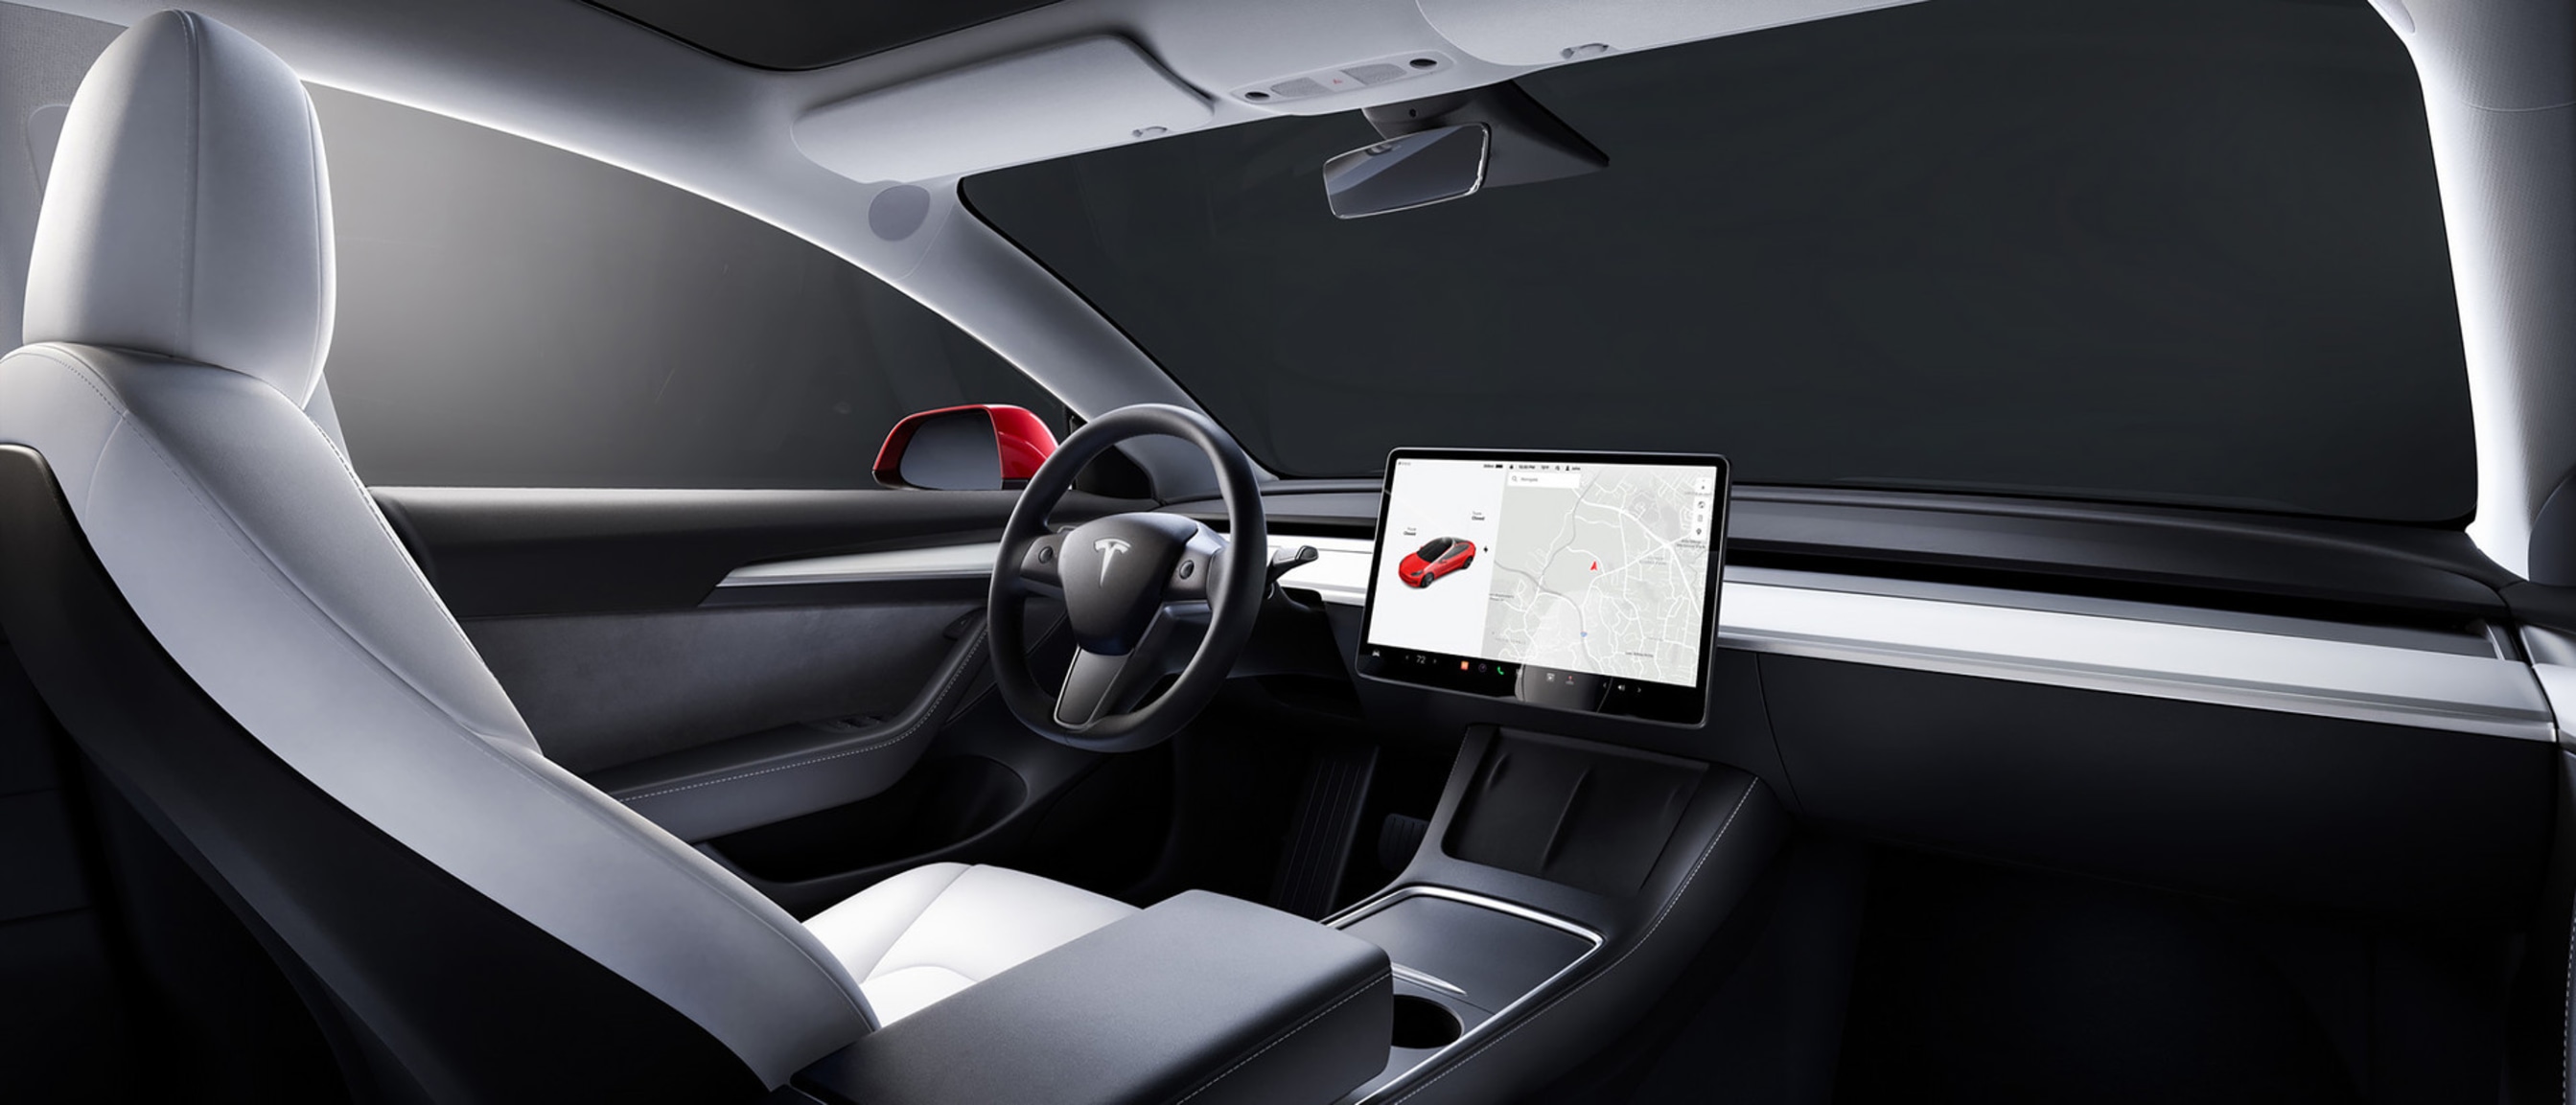 Backseat view from inside a Model 3 with white interior